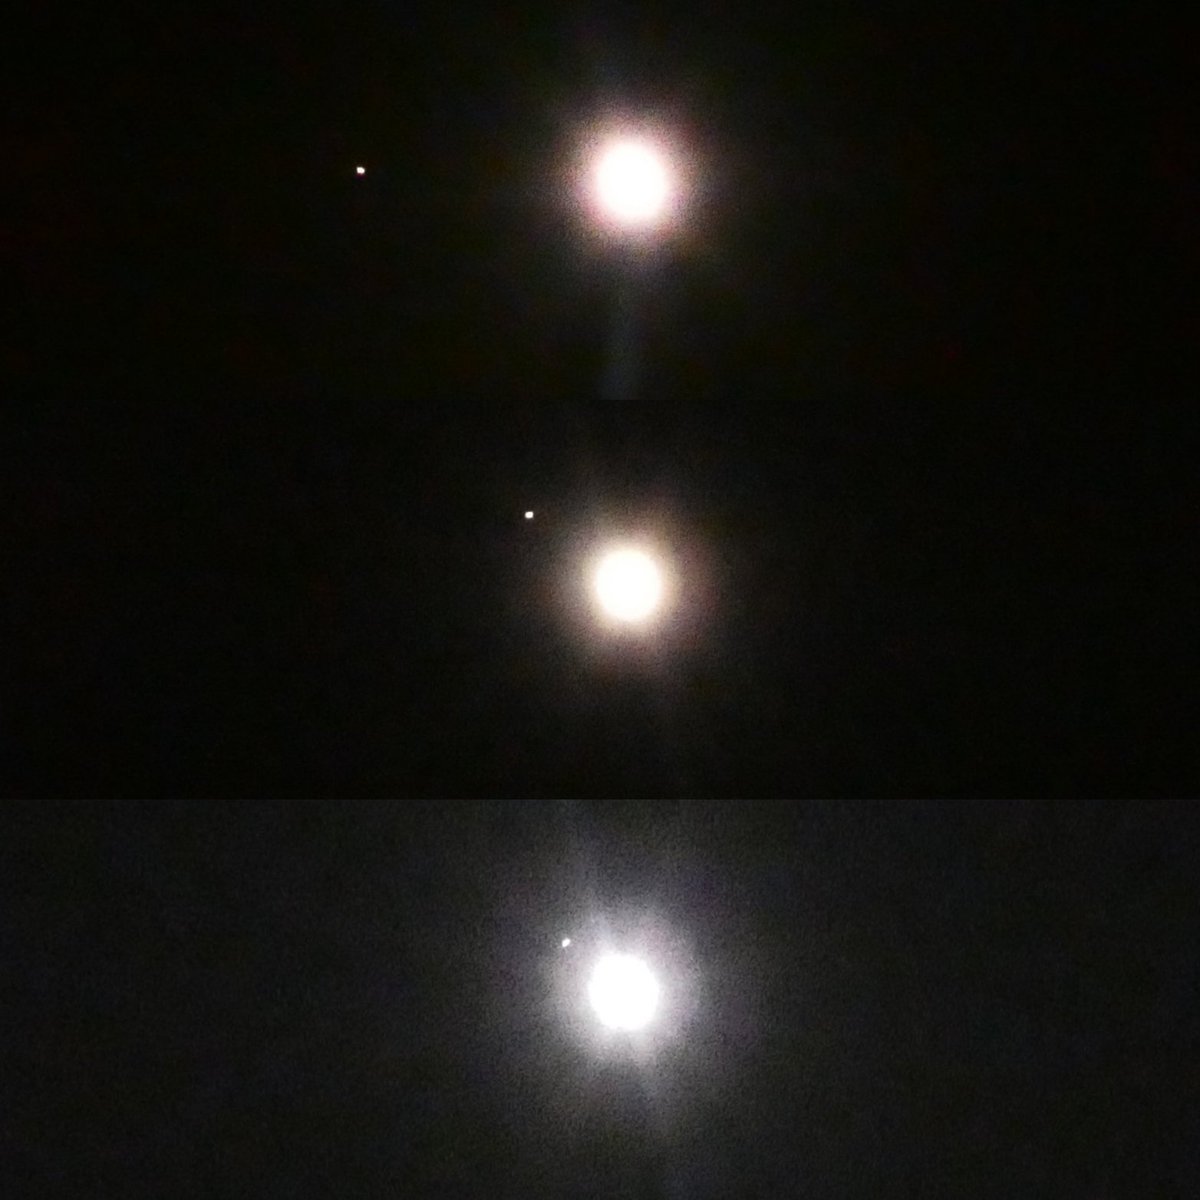 Another  #Astrophotography tweet. Of course, the  #GreatConjunction made all the news this month (more to come later) but in 2020 there were others especially Venus as the 8th sister of the Pleiades, Moon/Venus/Beehive cluster, Neptune/Venus and Mars flirting with the Moon all year